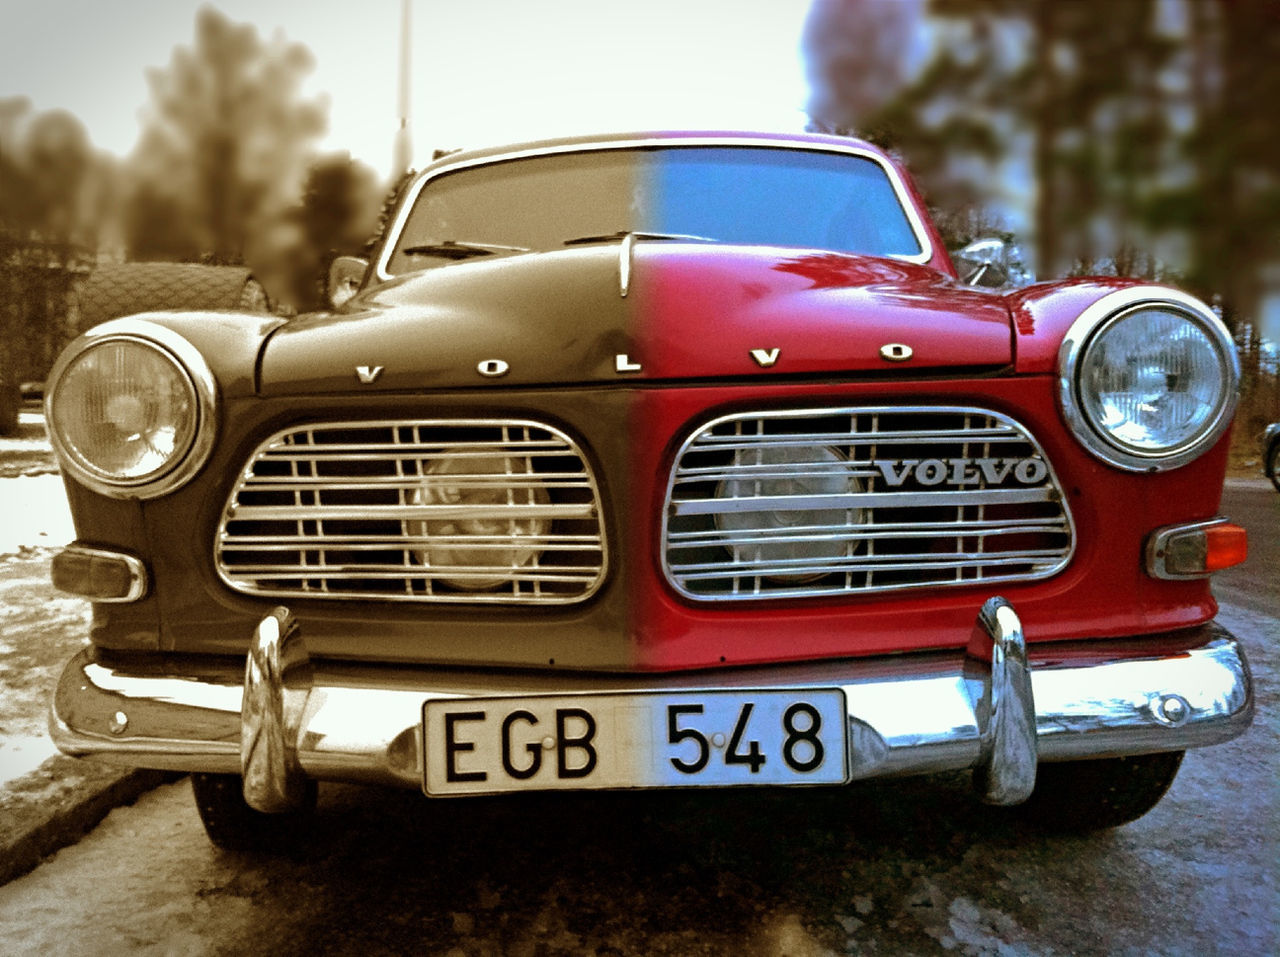 transportation, land vehicle, mode of transport, car, focus on foreground, close-up, red, street, travel, communication, vintage car, day, old-fashioned, outdoors, no people, headlight, road, stationary, yellow, part of